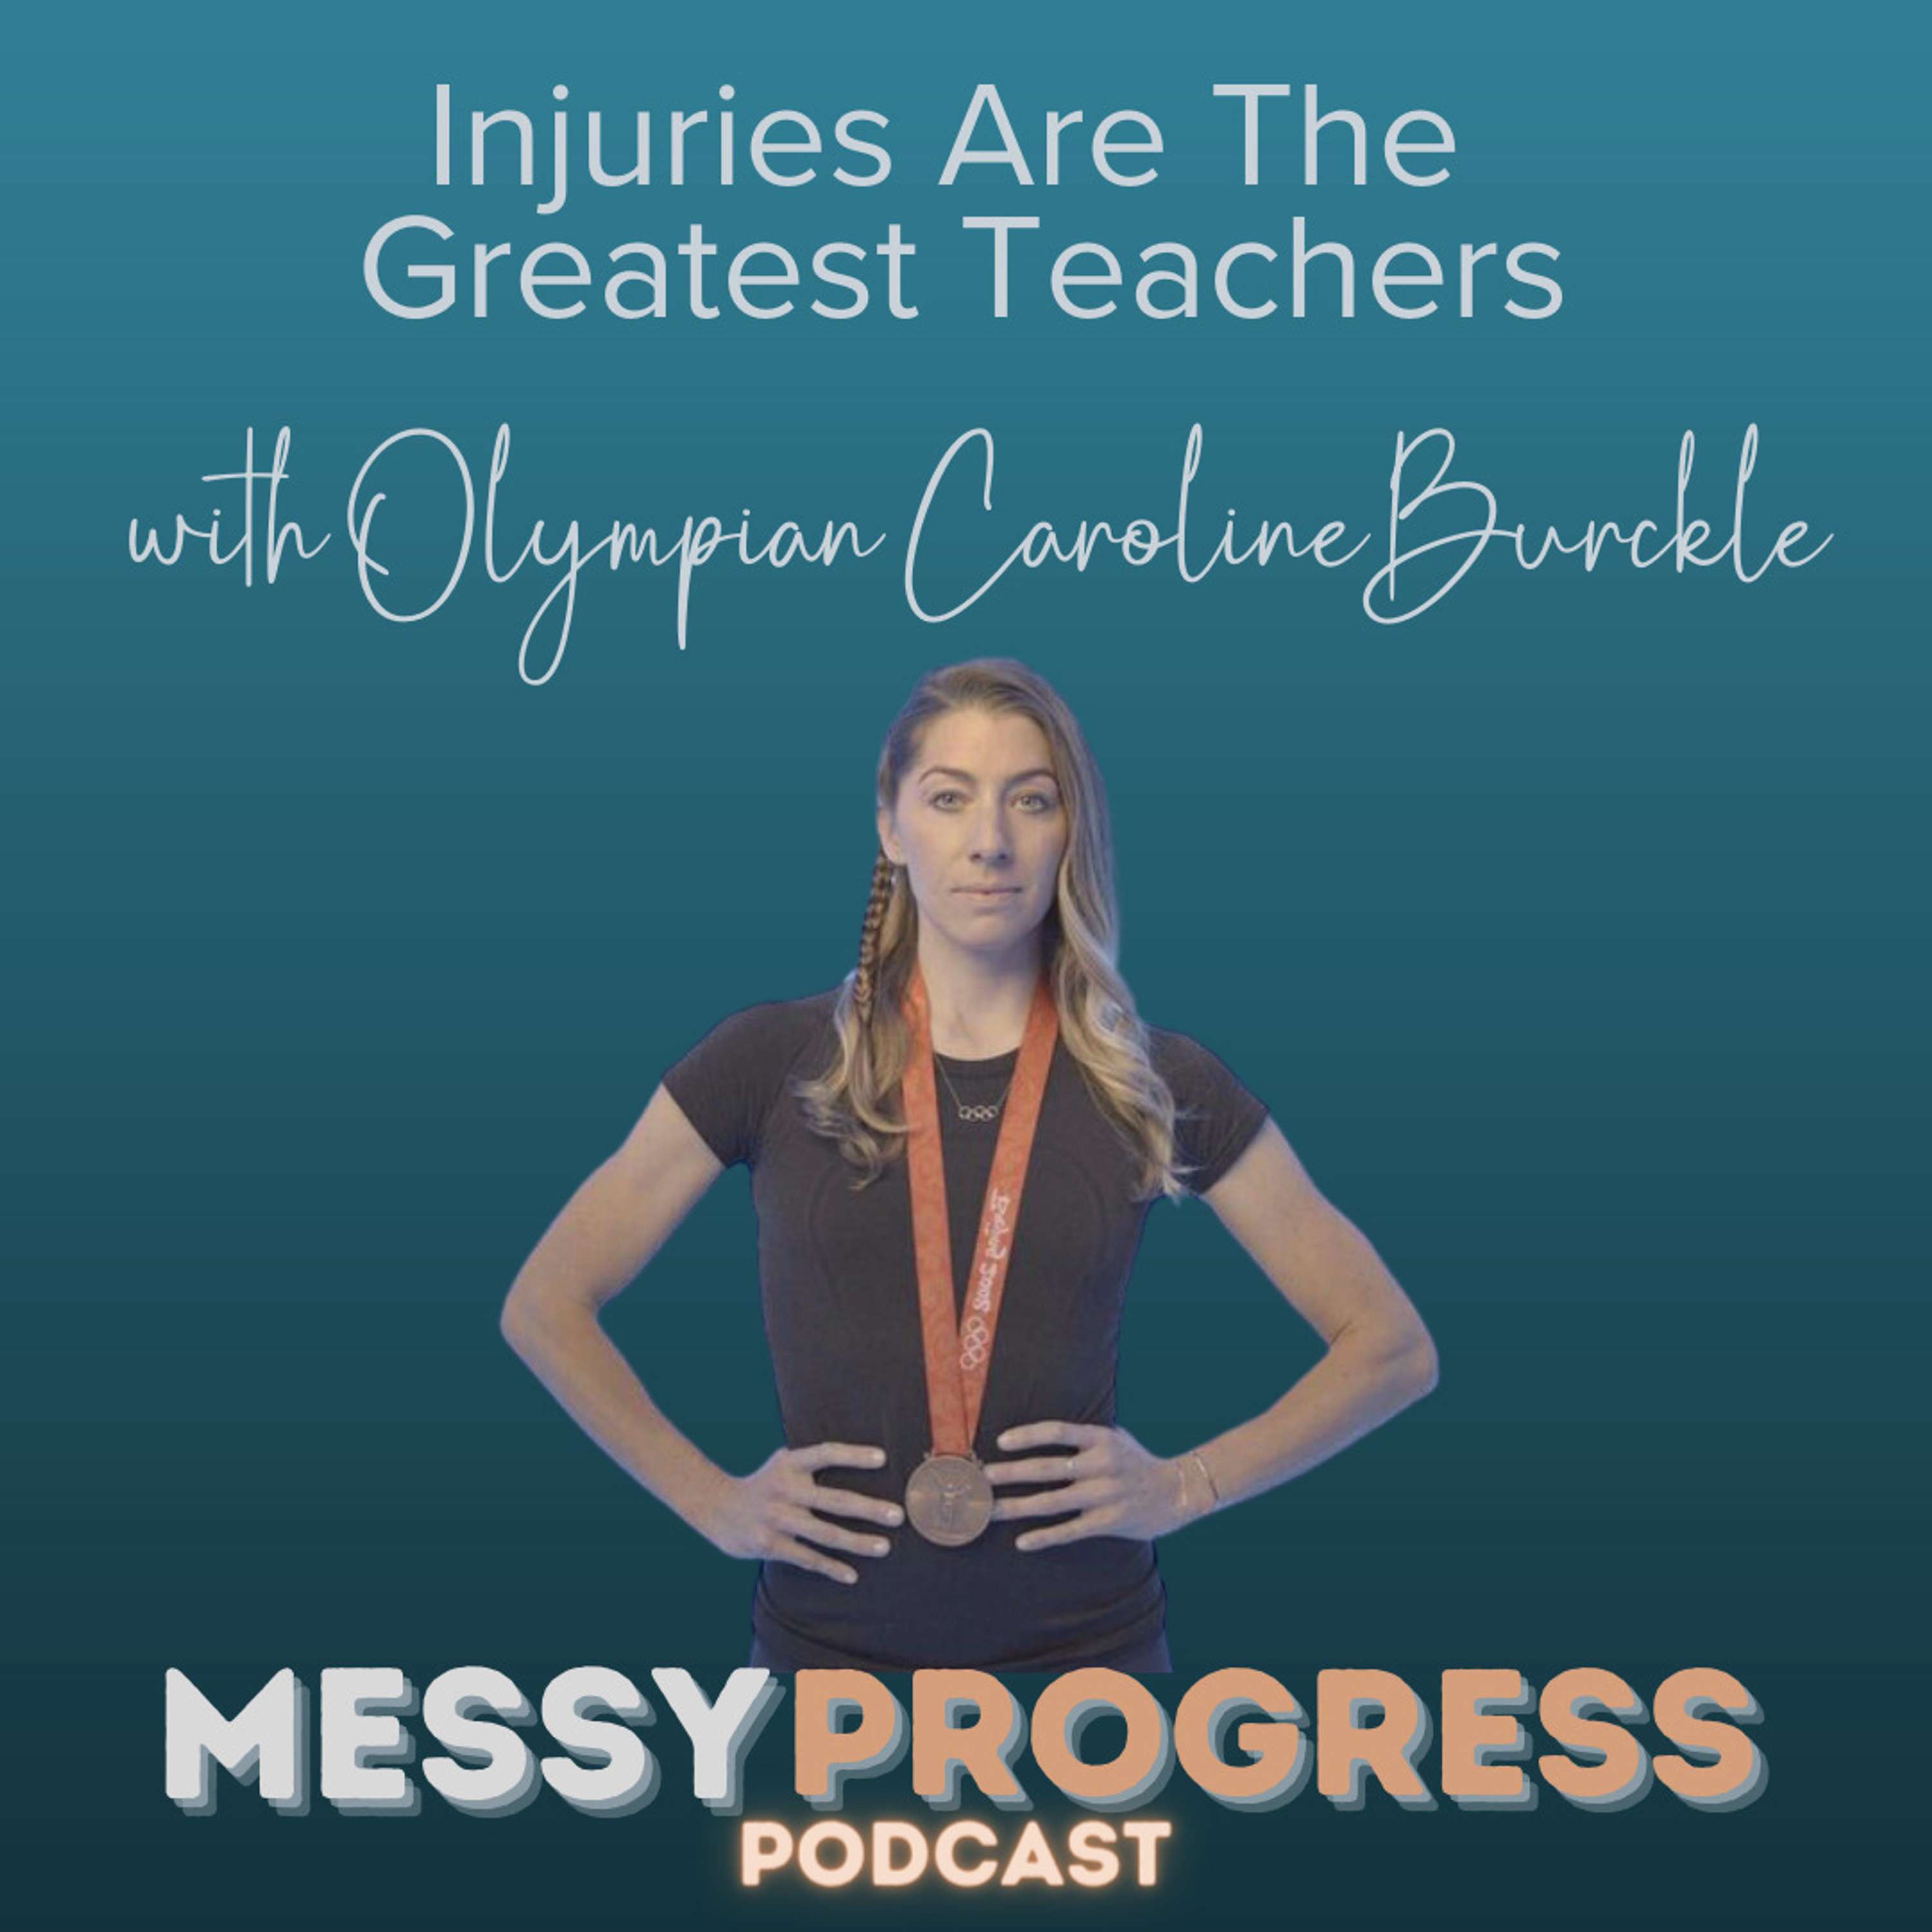 Injuries Are The Greatest Teachers with Olympic Bronze Medalist, Caroline Burckle